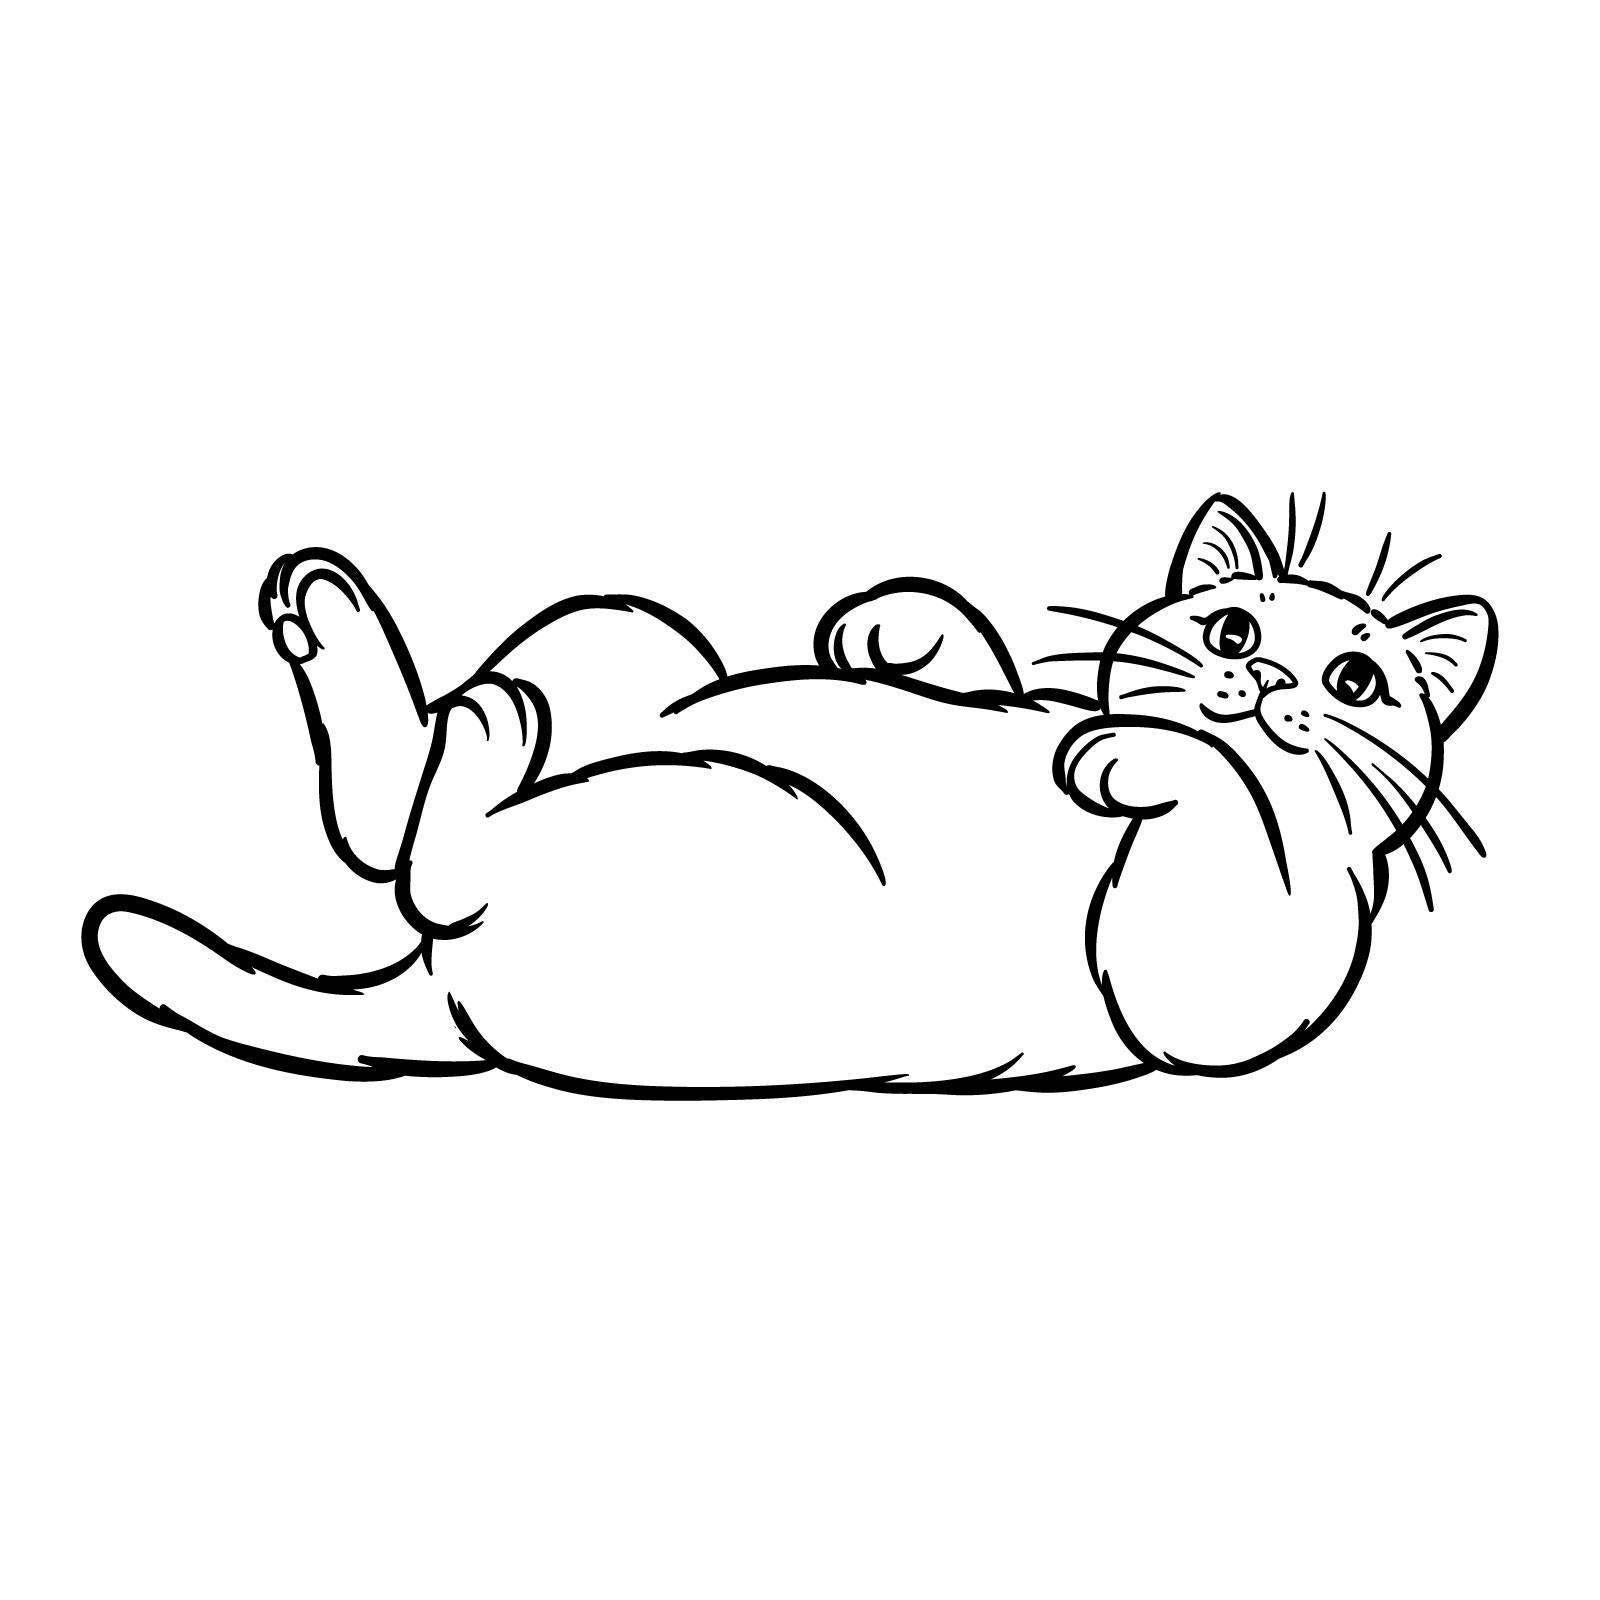 Complete drawing of a cat lying on its back without the initial guidelines, showing a relaxed and playful posture - step 10